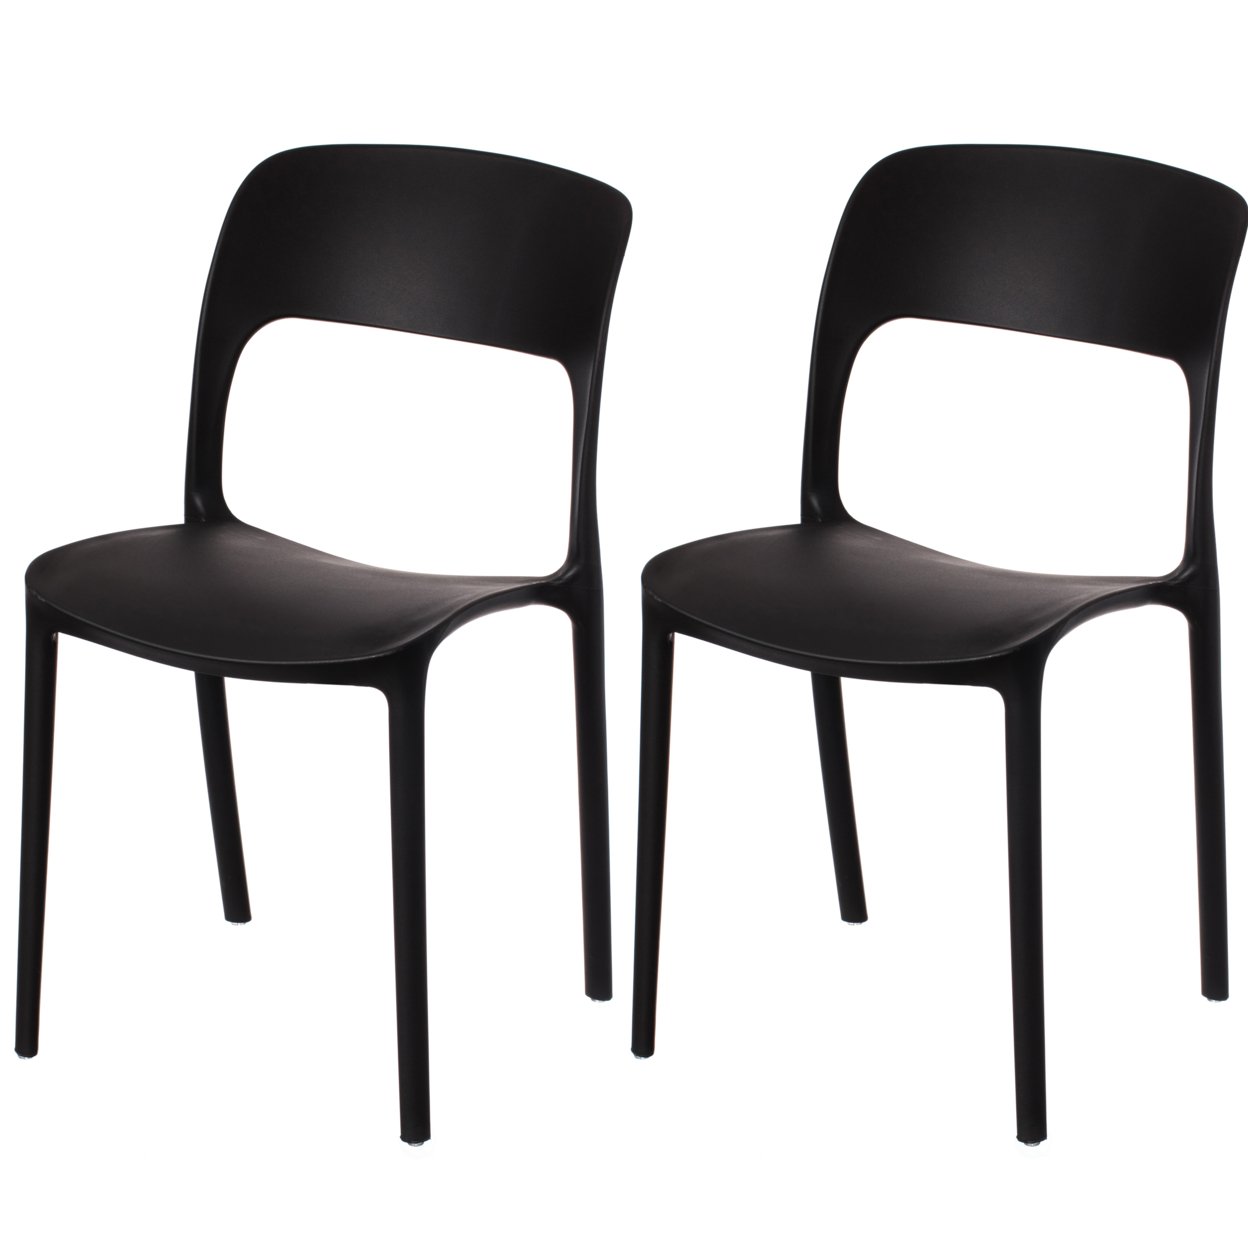 Modern Plastic Outdoor Dining Chair With Open Curved Back - Single Black